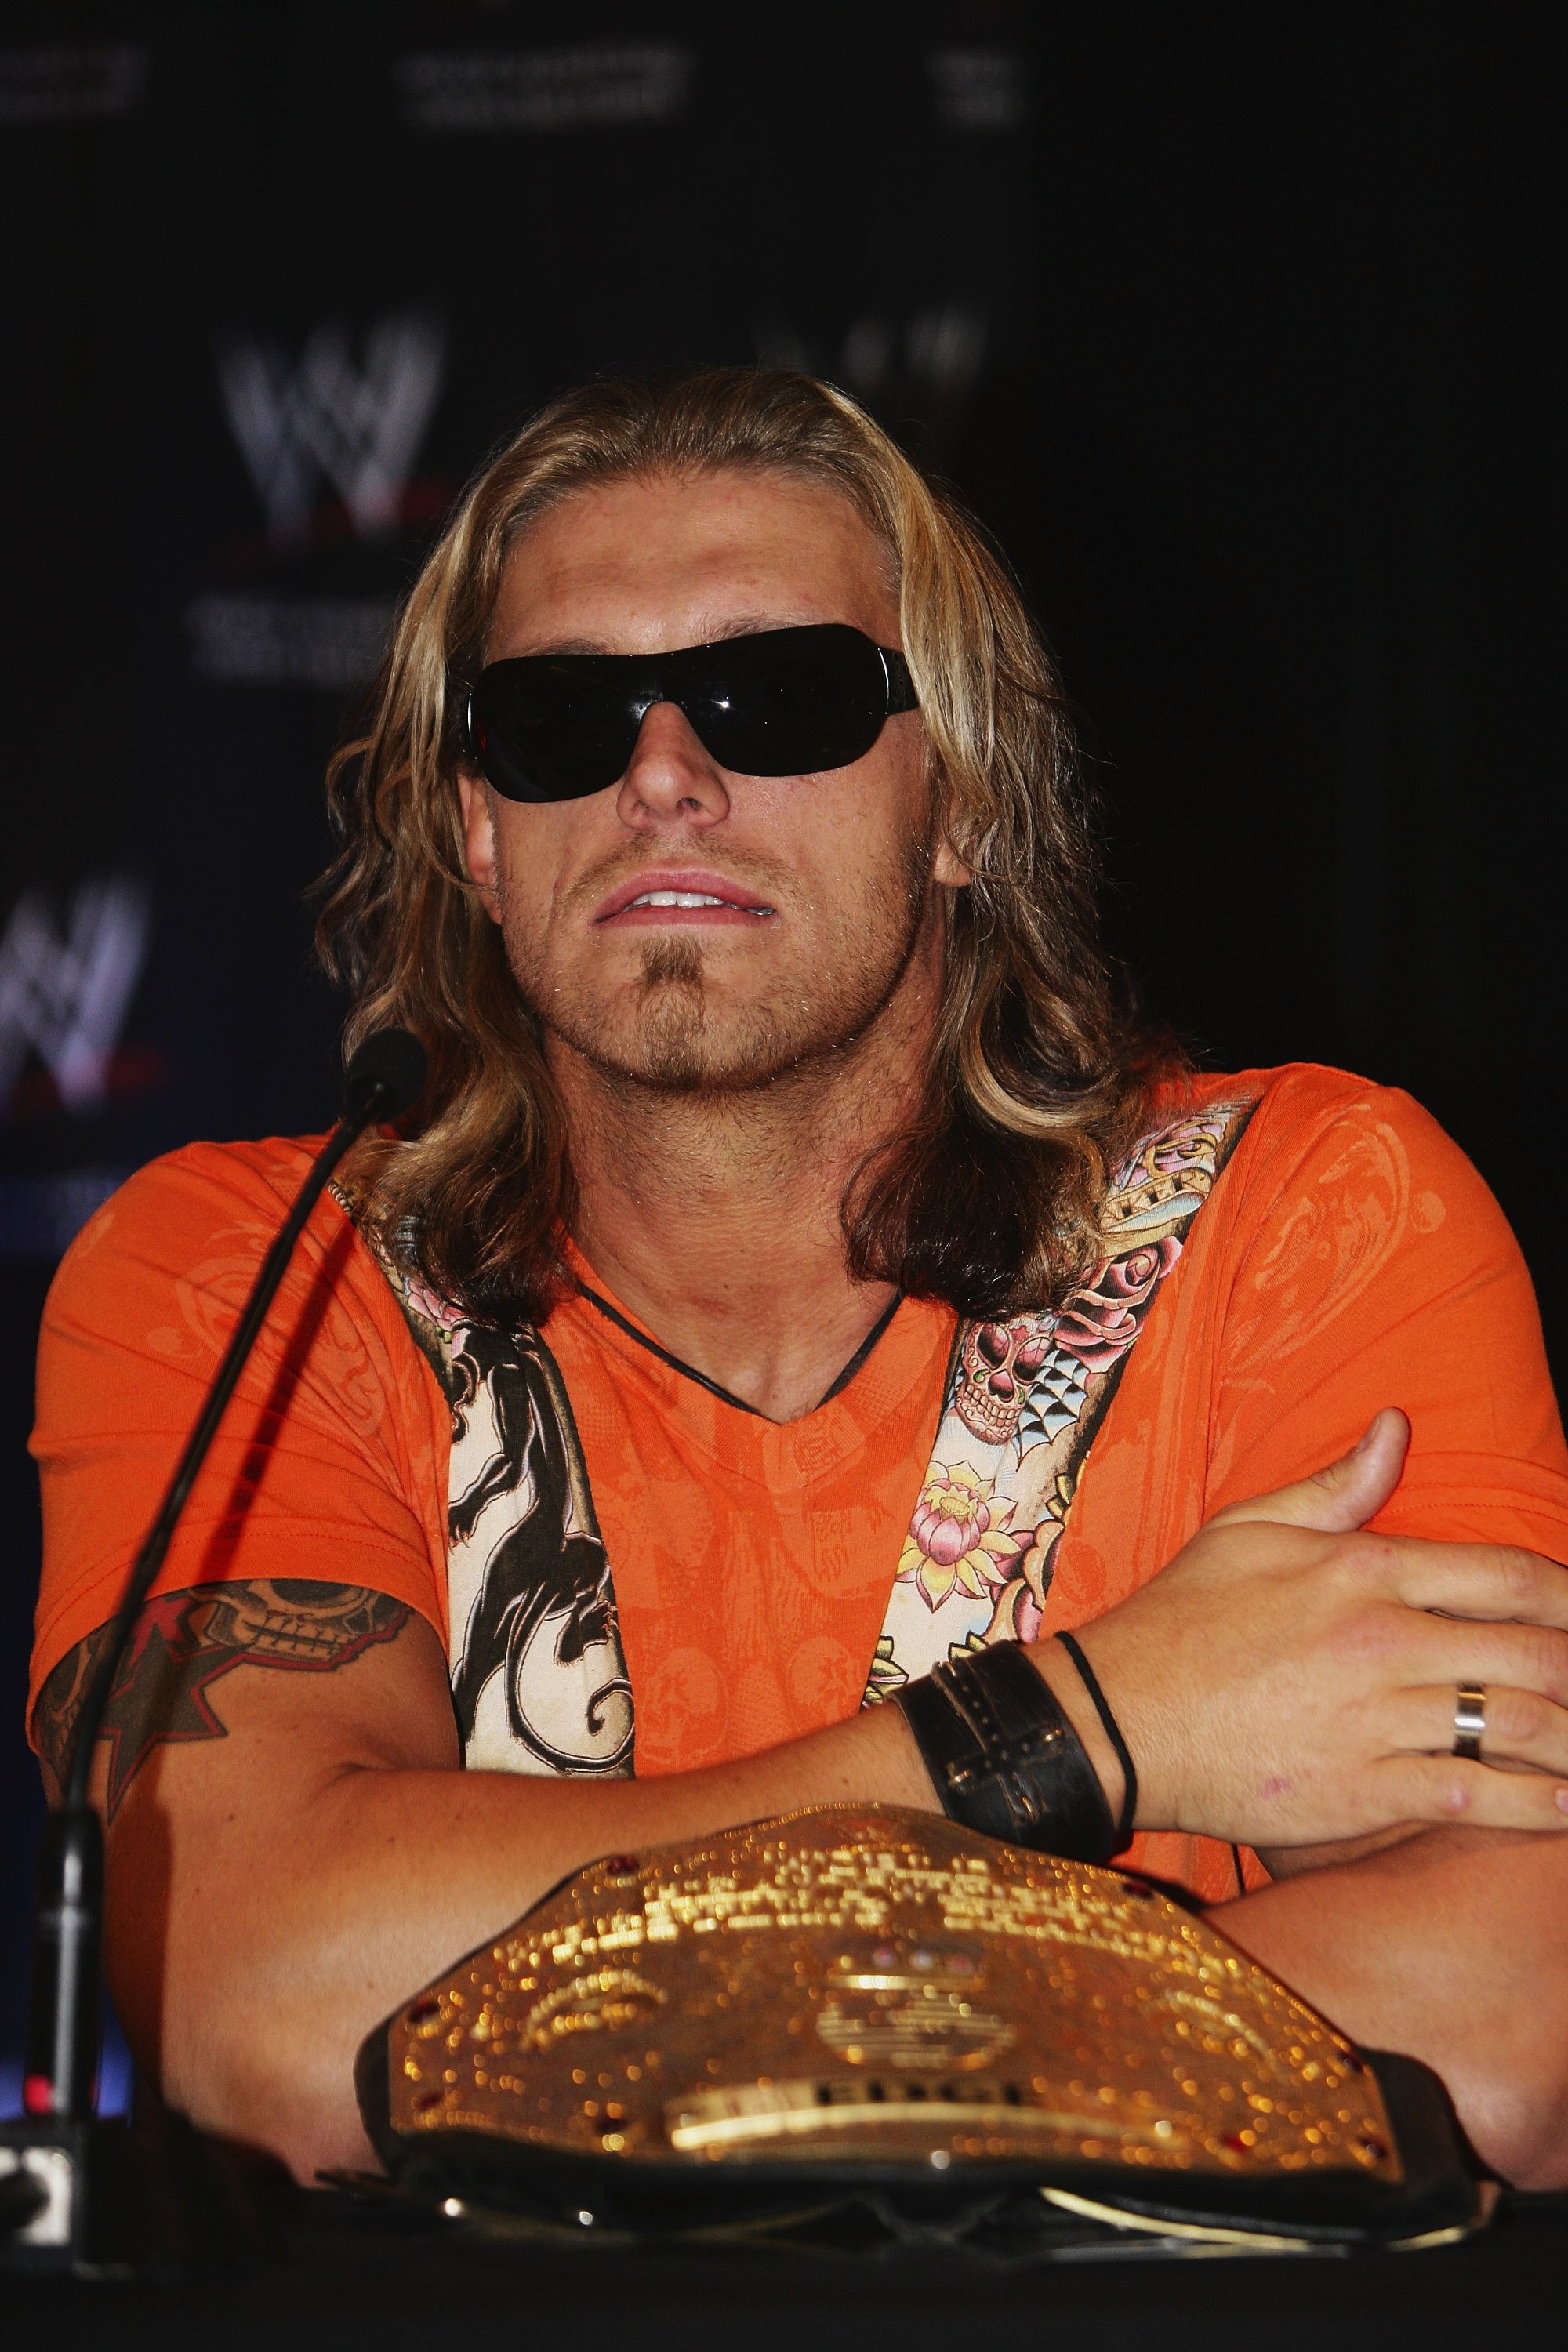 Edge during the WWE Smackdown Photo Call on June 15, 2008, in Sydney, Australia. | Source: Getty Images